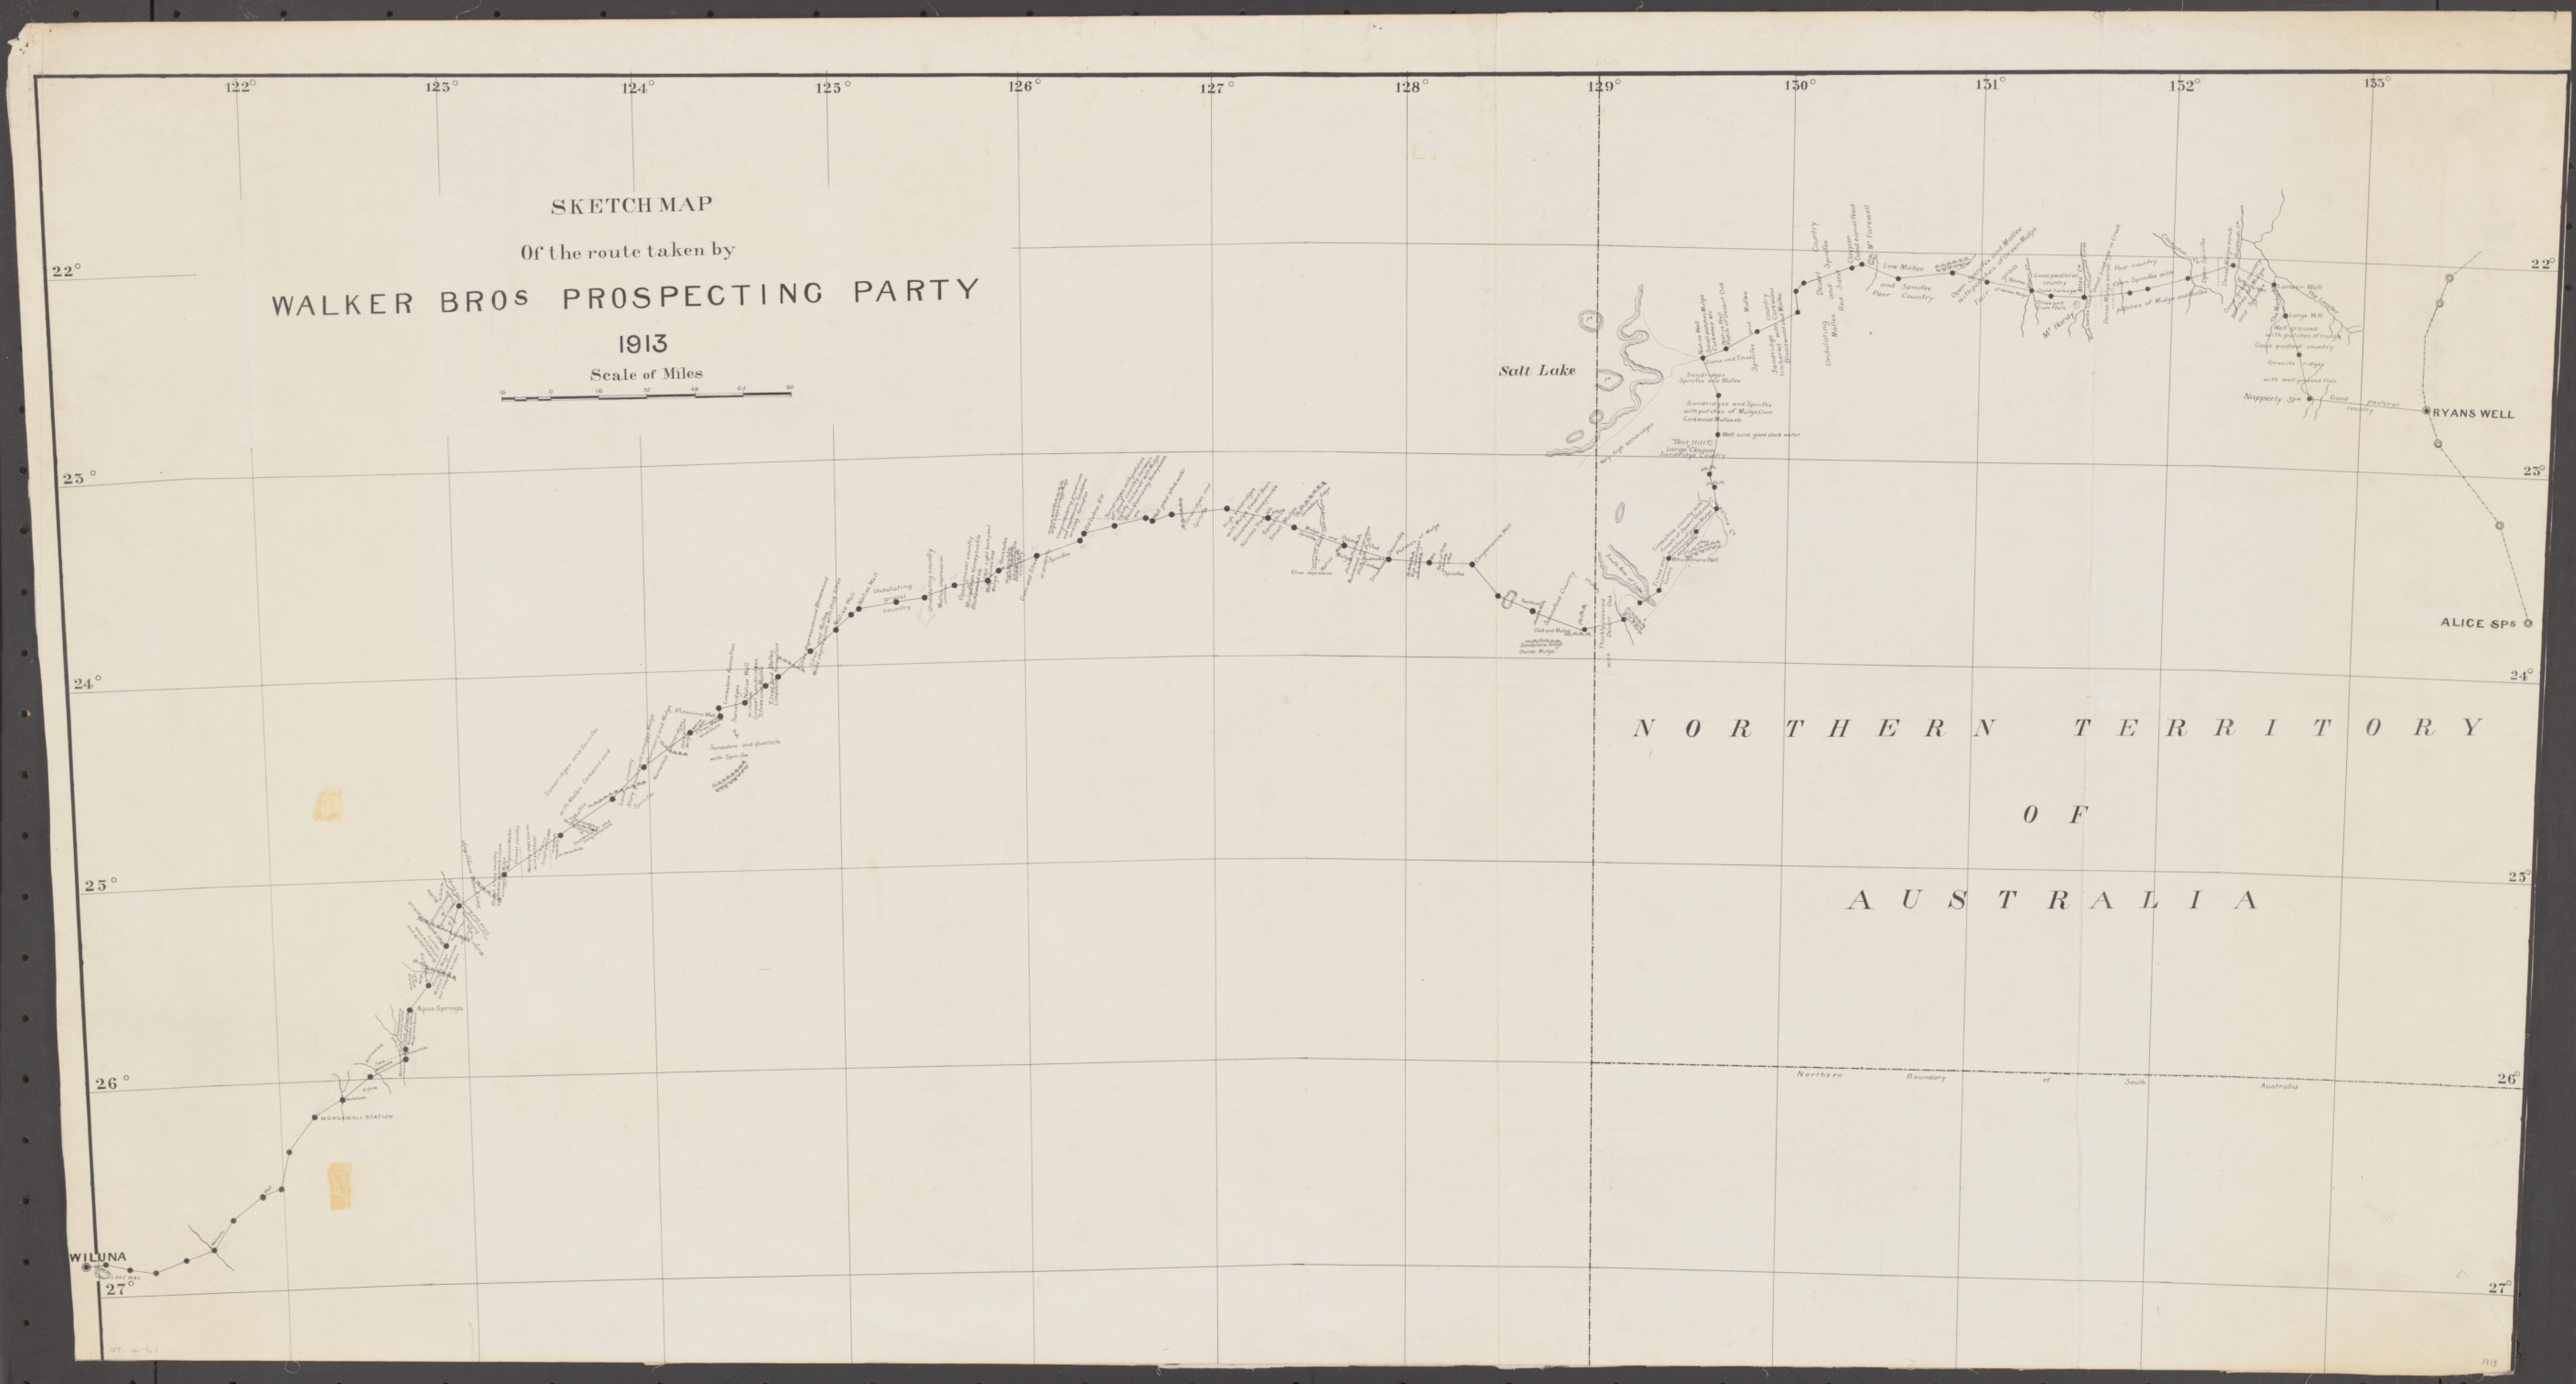 Sketch map of the route taken by Walker Bros prospecting party 1913